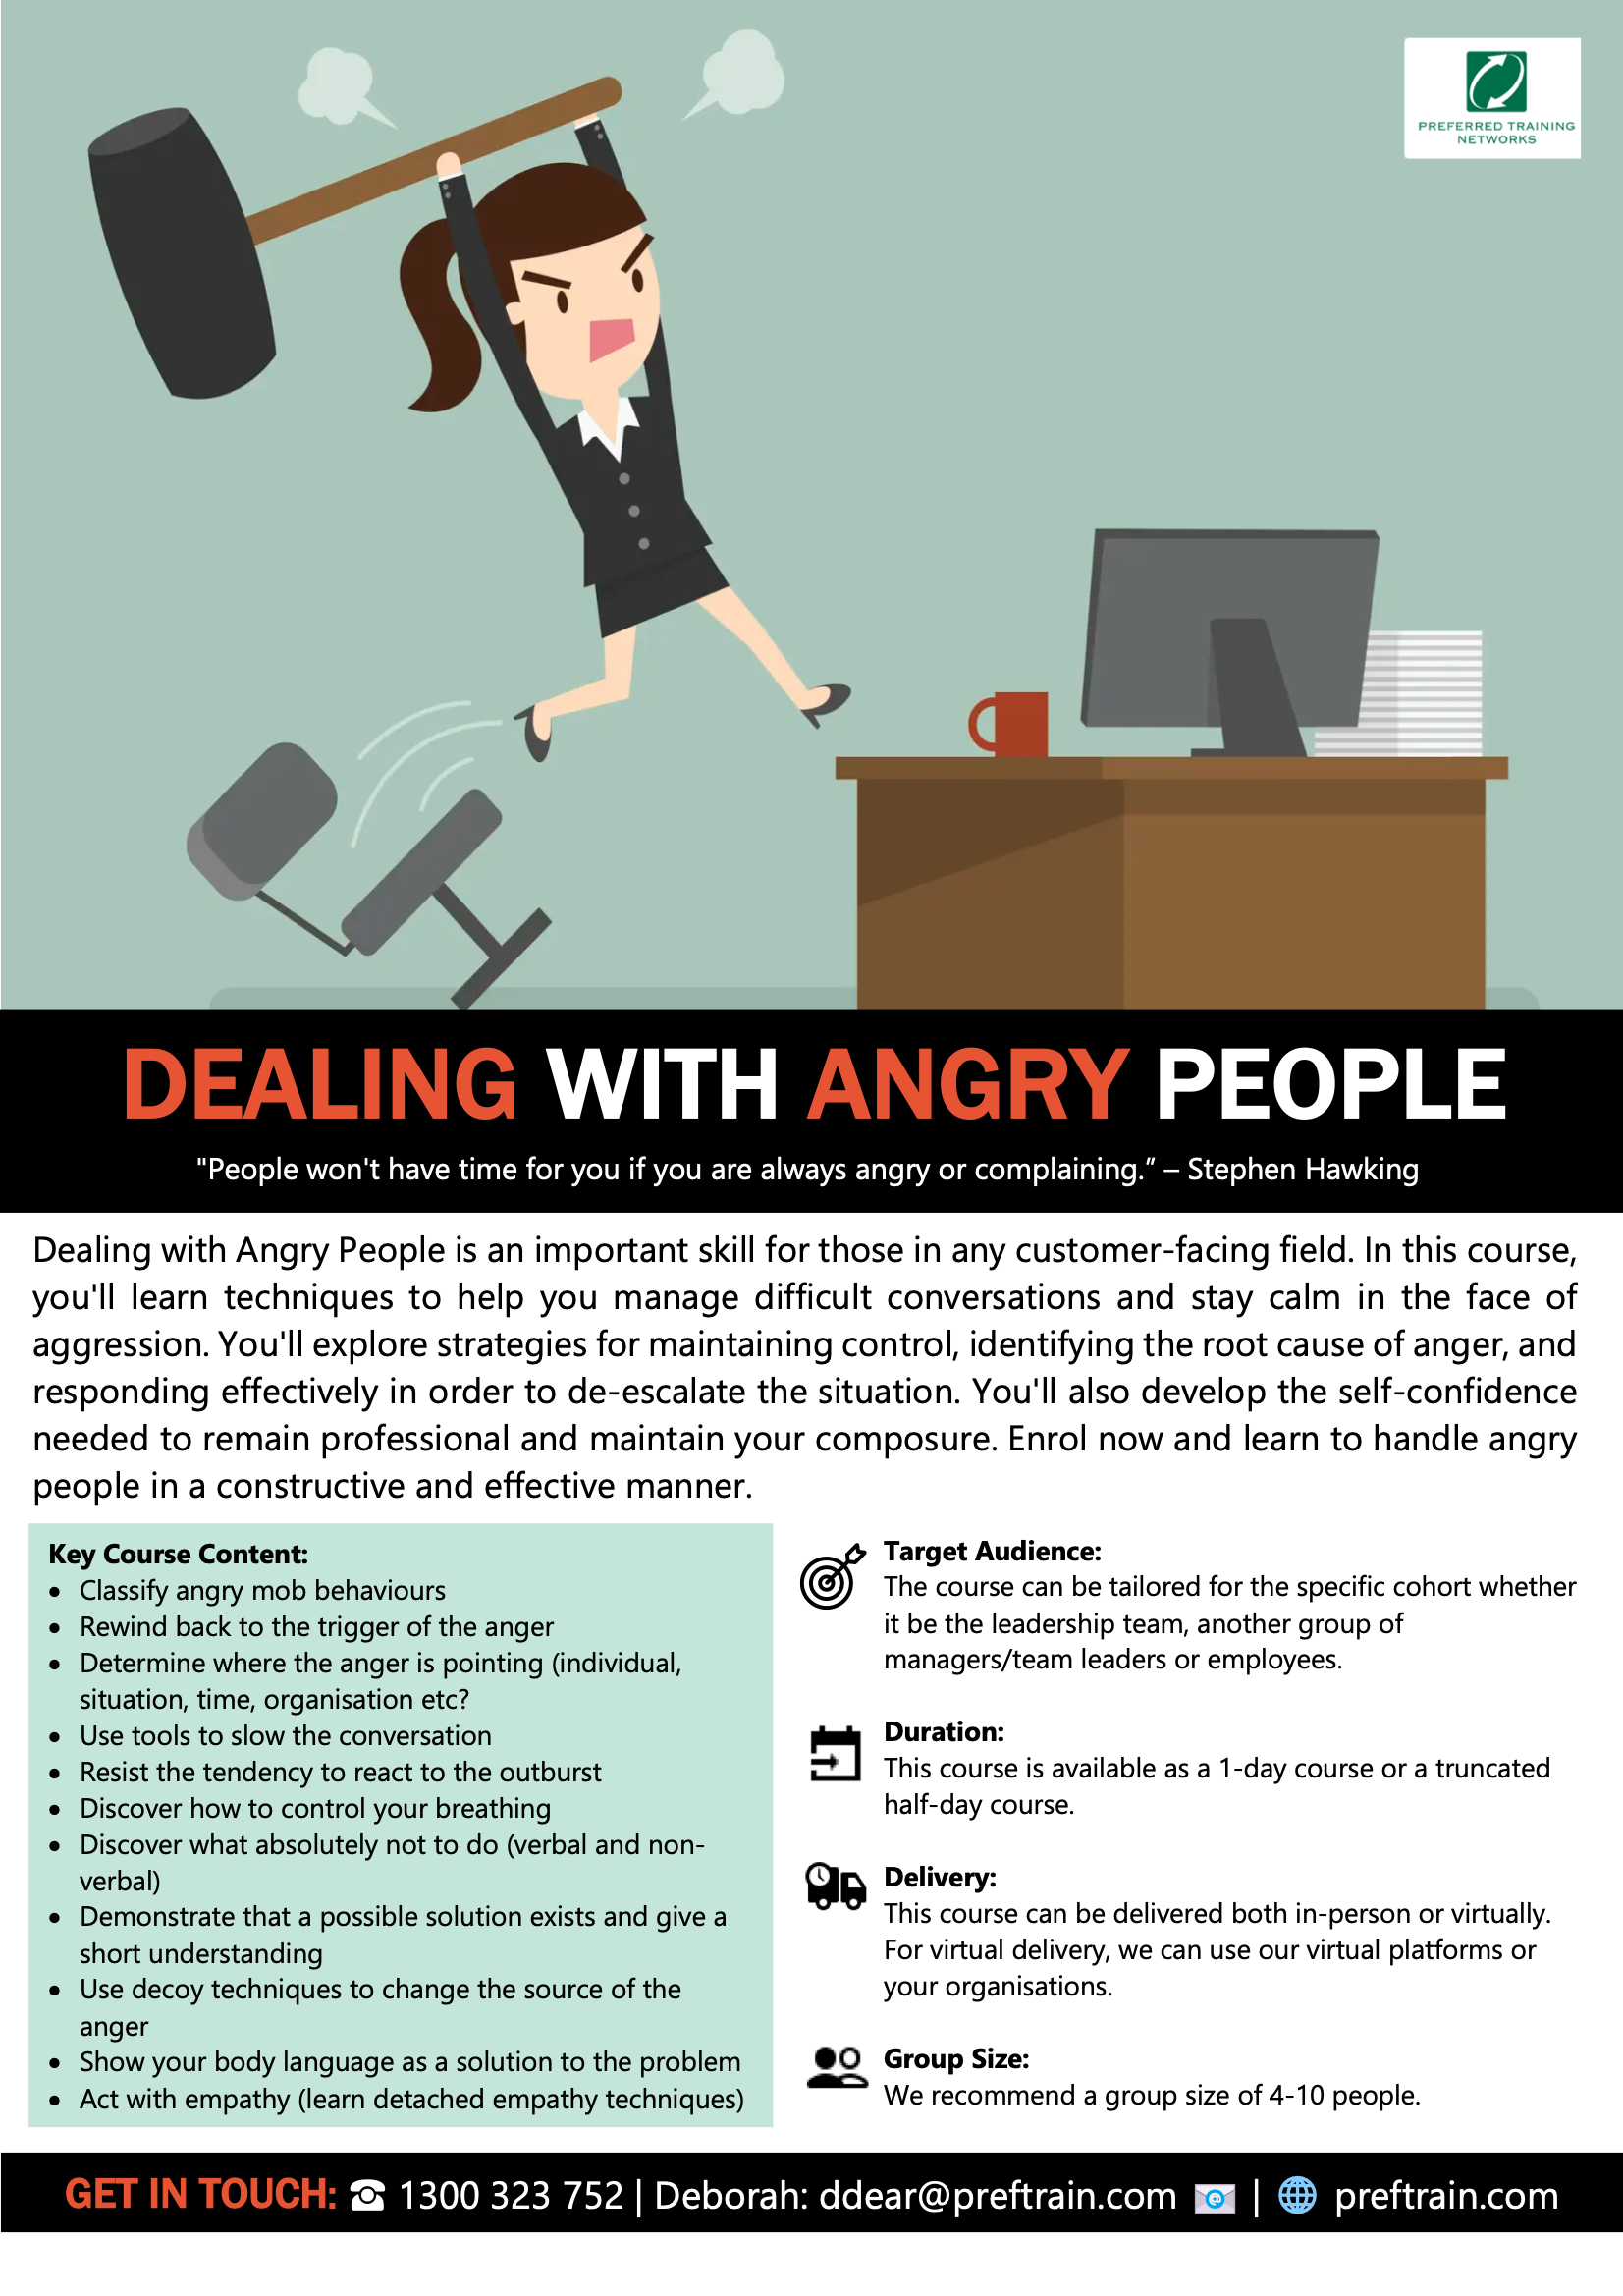 DEALING WITH ANGRY PEOPLE